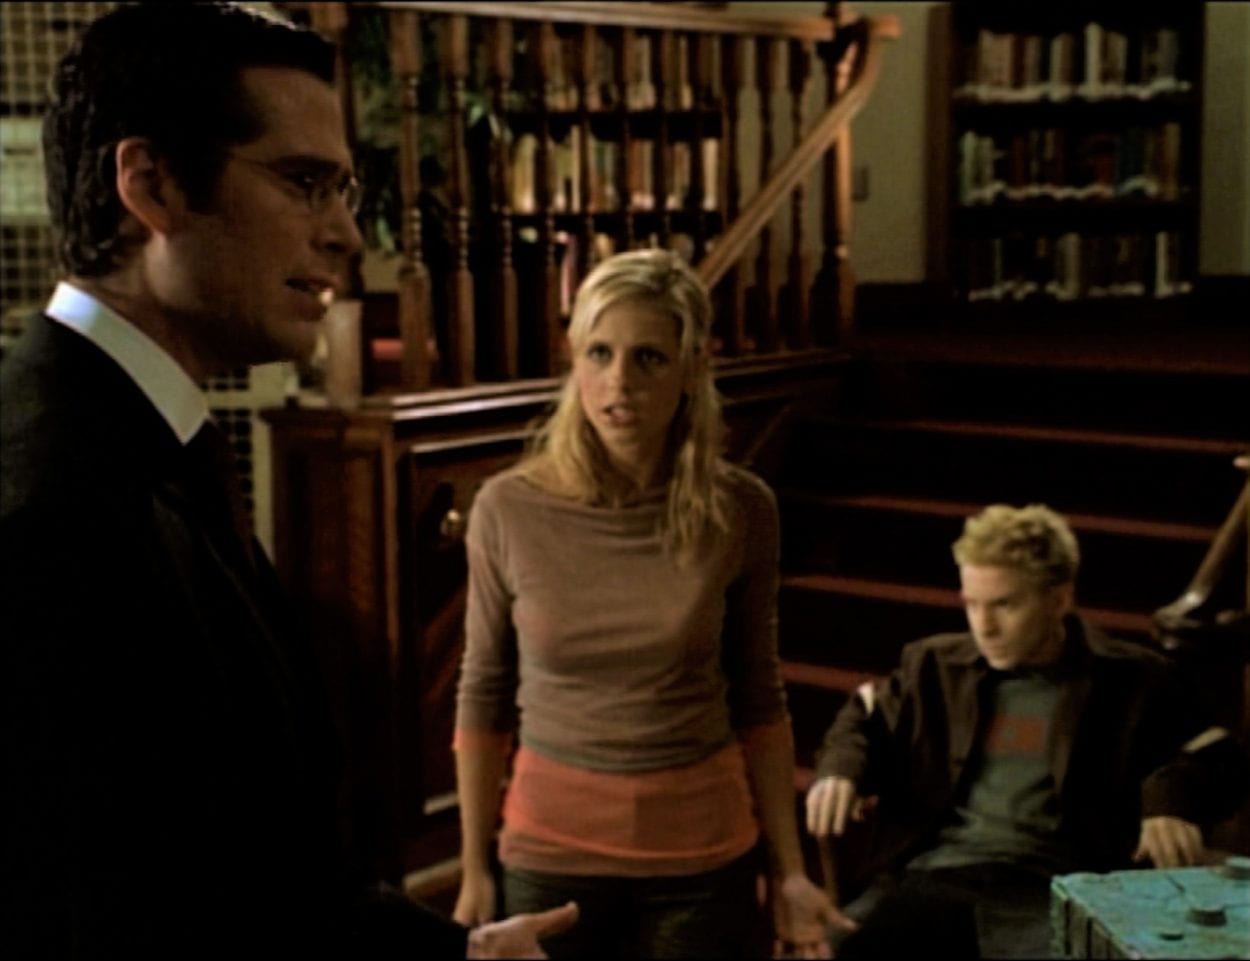 Wesley and Buffy are arguing in the library, while Oz sits in the background